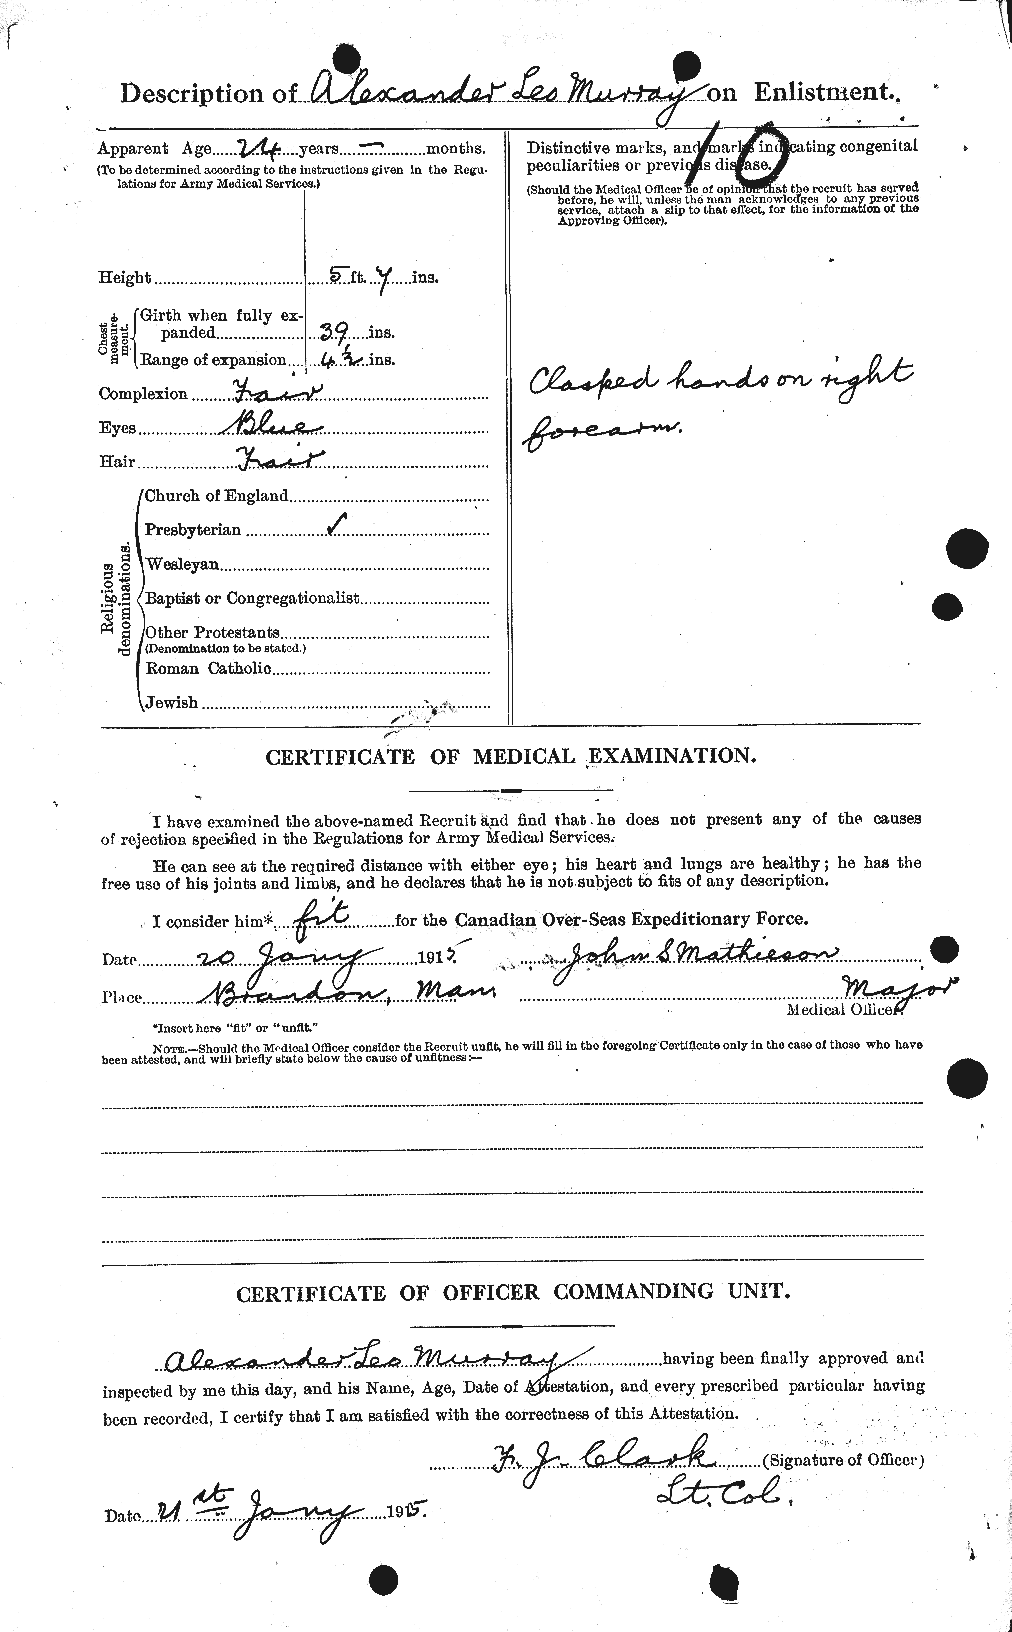 Personnel Records of the First World War - CEF 512430b